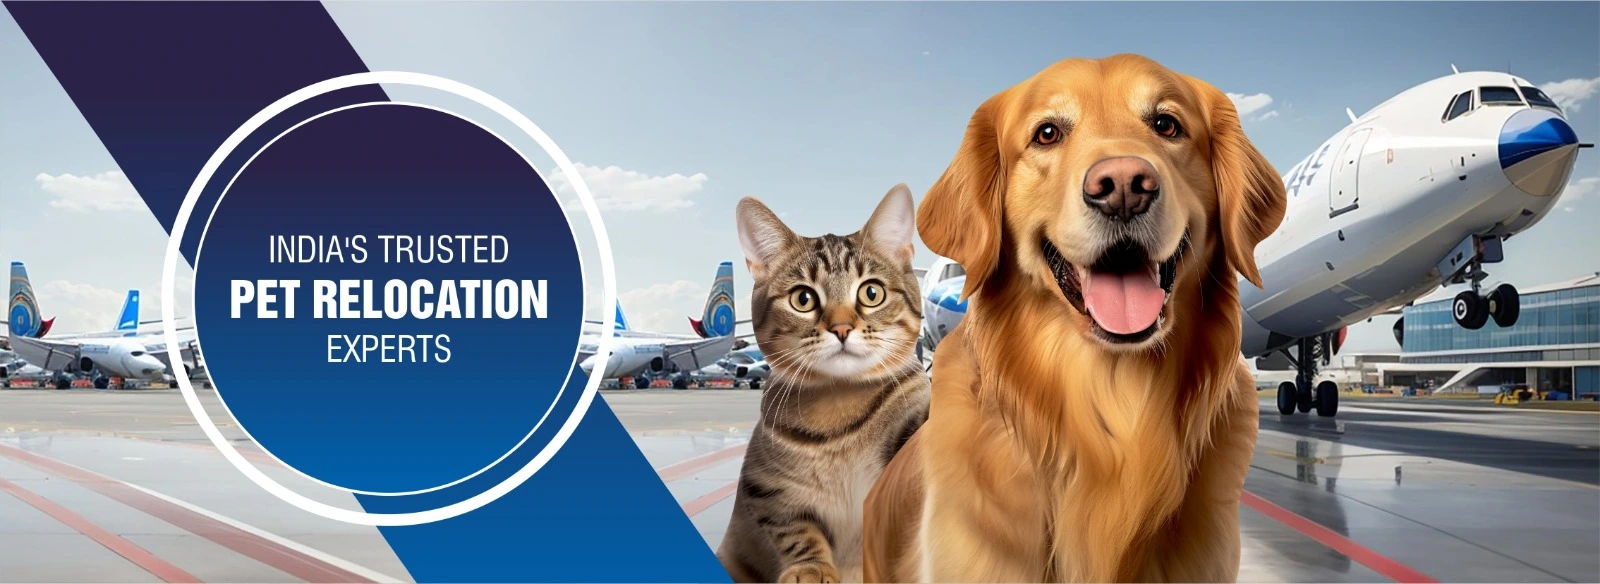 Relocate Your Beloved Pets Safely with Expert Pet Relocation Services